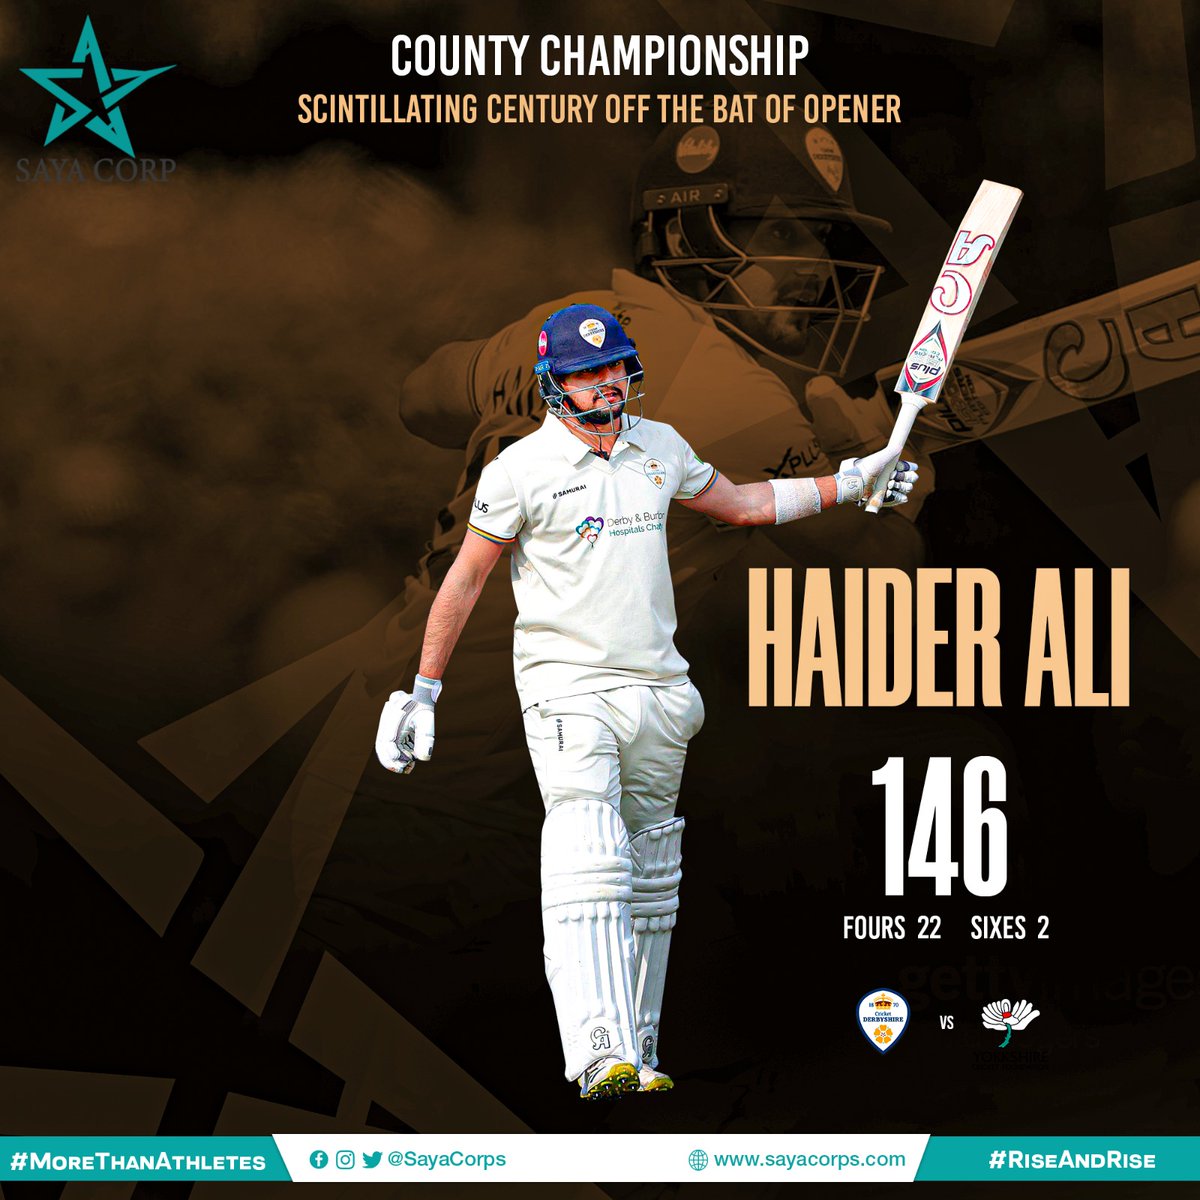 The CLASS of @iamhaideraly 🙌🏻 The Derbyshire batter was at his very best in the ongoing county championship game scoring a magnificent 1️⃣4️⃣6️⃣ including 2️⃣2️⃣ boundaries and 2️⃣ maximums. Fans love to see him #RiseAndRise! #MoreThanAthletes #SayaCorporation @TalhaAisham